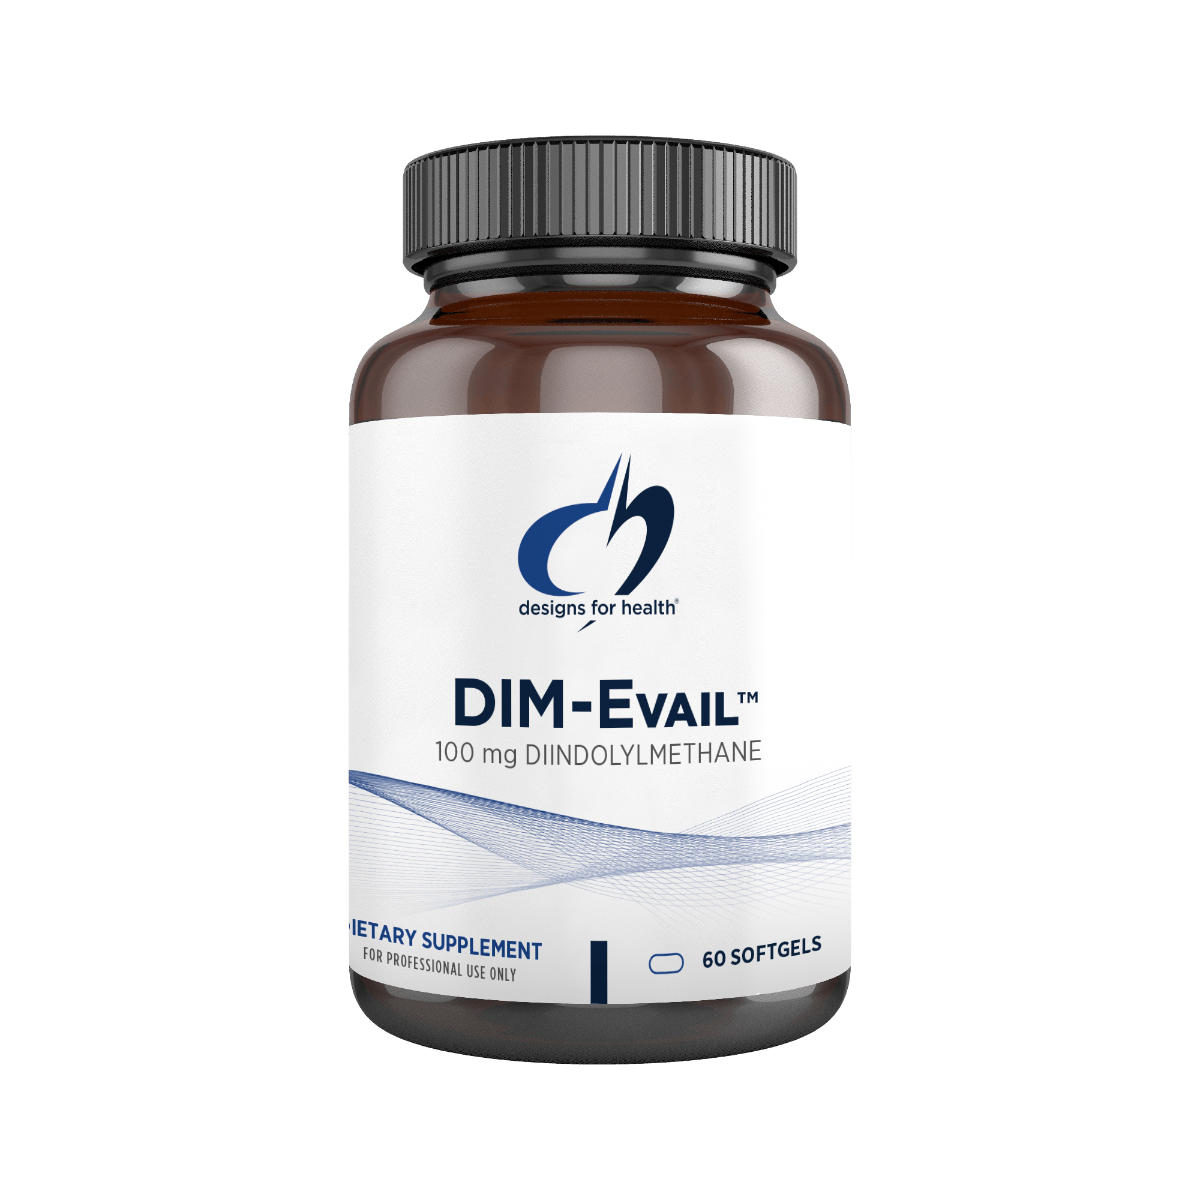 DIM-Evail Design for Health (DFH) in New Zealand